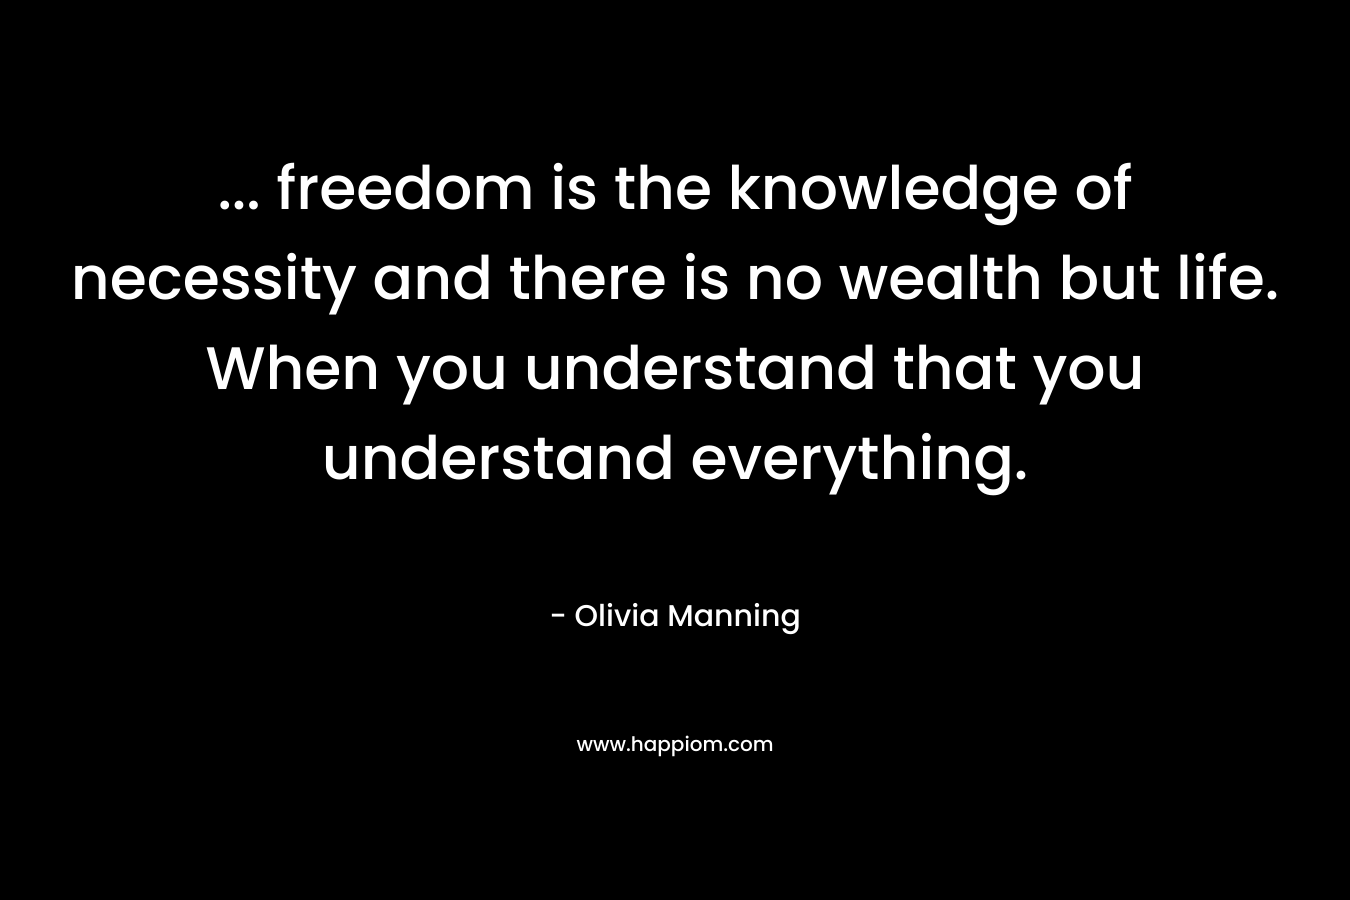 ... freedom is the knowledge of necessity and there is no wealth but life. When you understand that you understand everything.